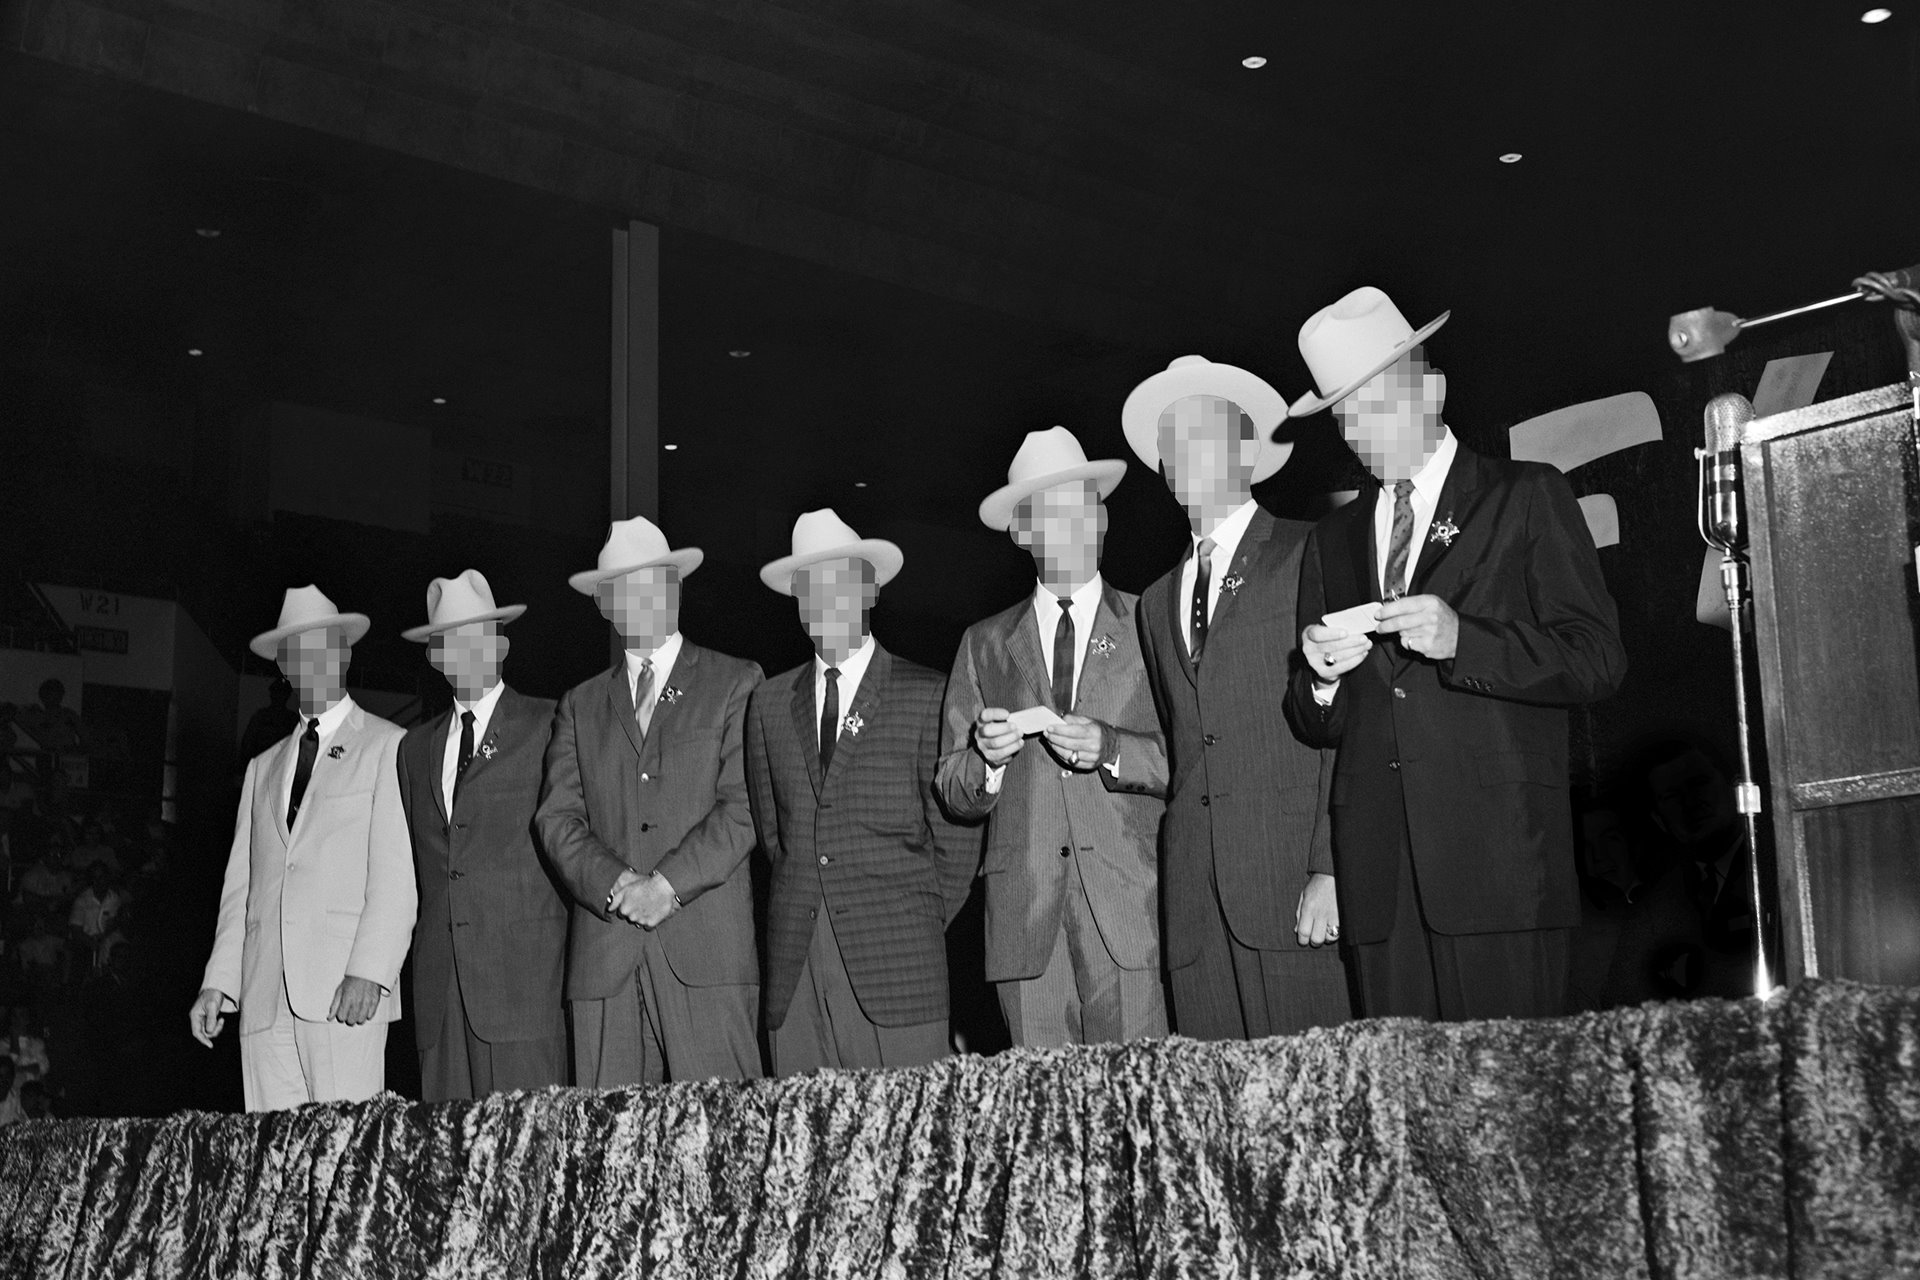 A manipulated NASA image of the Mercury Seven astronauts being welcomed to Texas, United States, at the Sam Houston Coliseum on July 4, 1962. The seven selected were all US military test pilots. To date, NASA astronauts train in Texas and launch from Florida, two states with historically strong anti-LGBTQI+ sentiments.&nbsp;